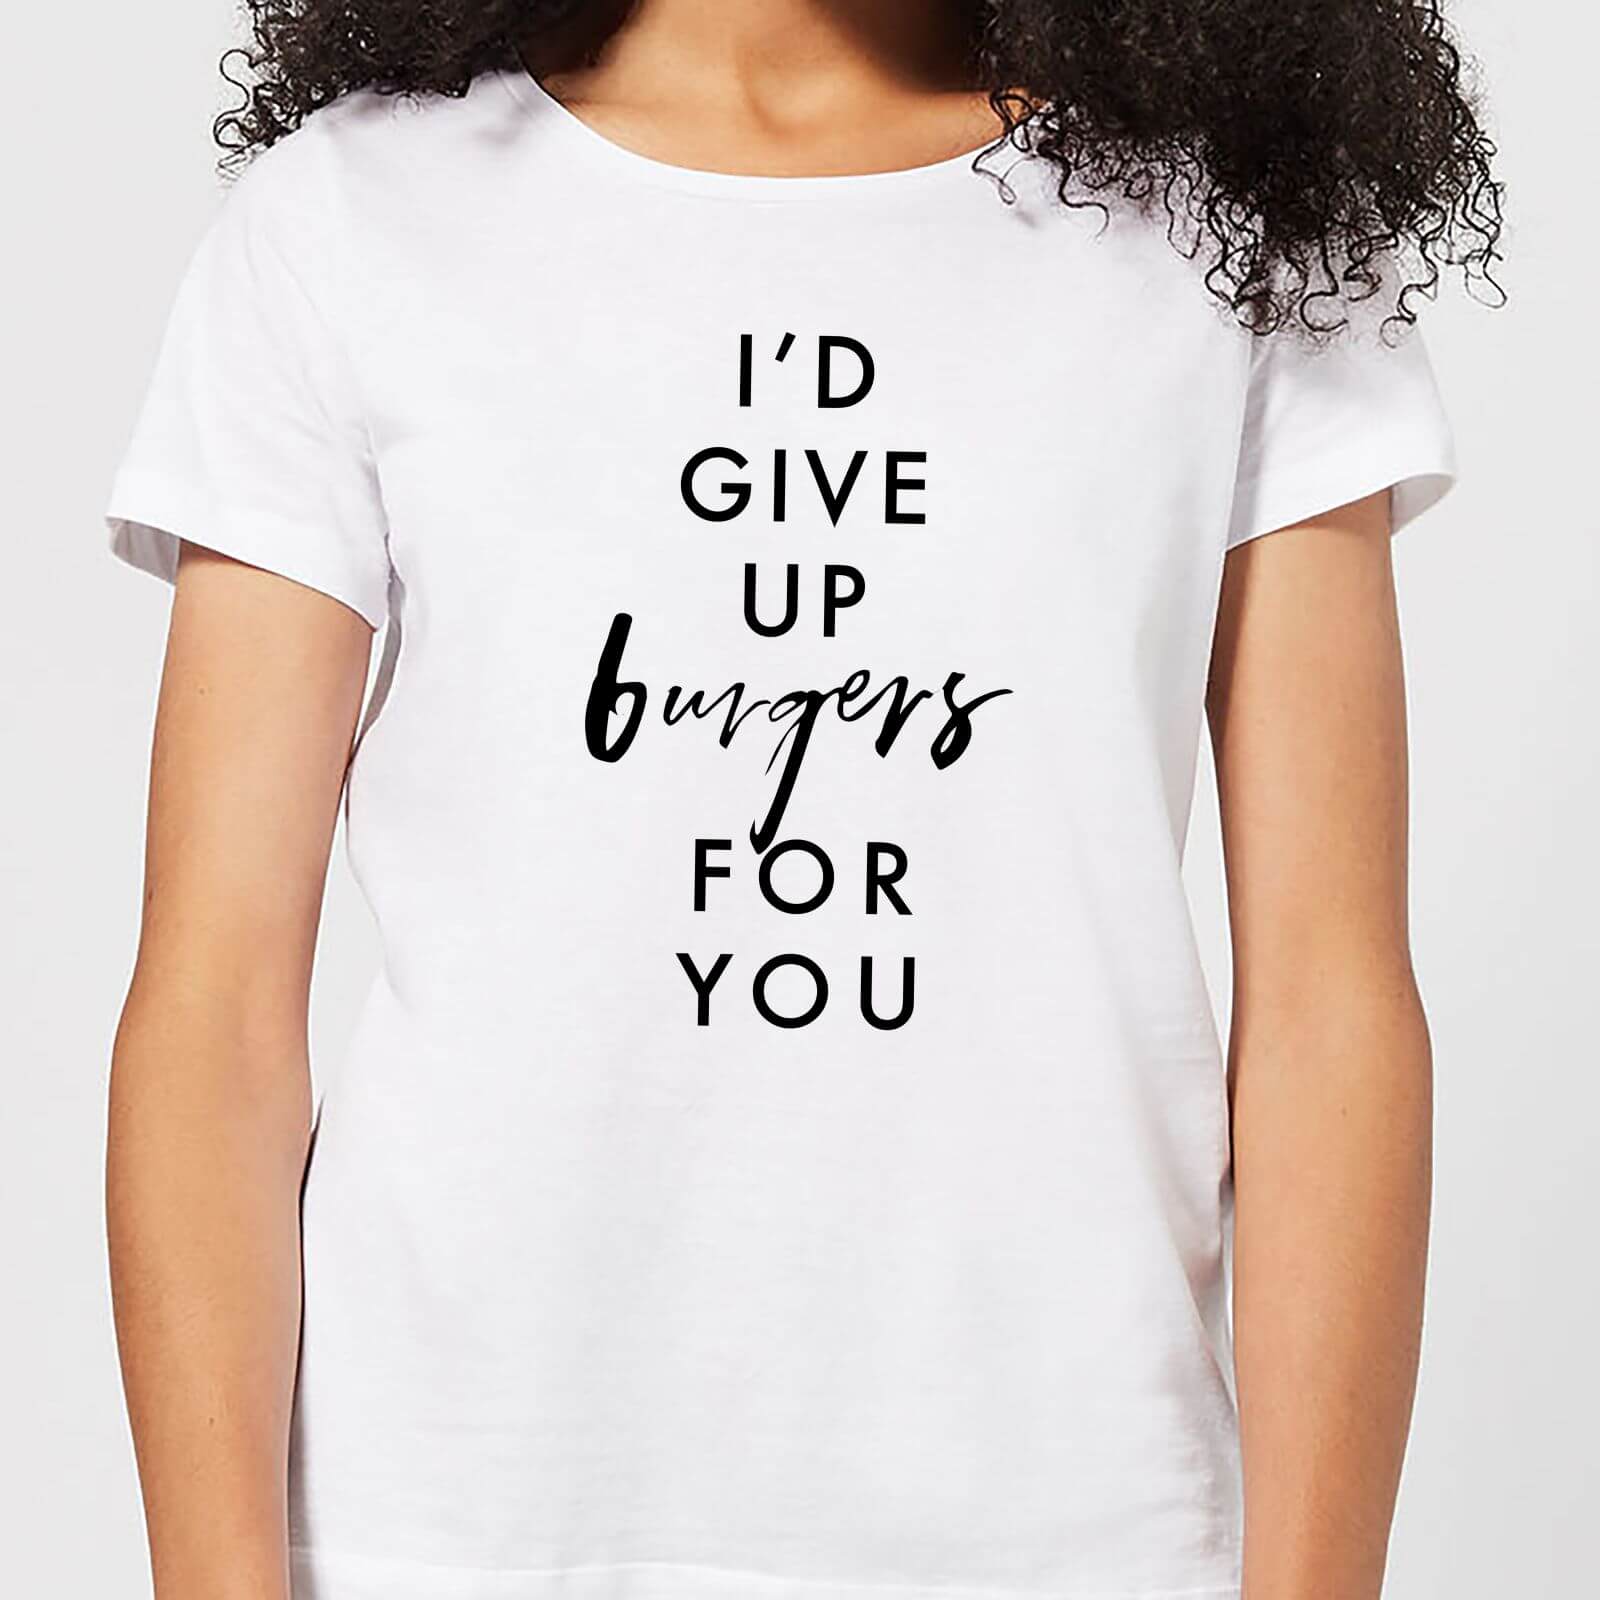 I'd Give Up Burgers for You Women's T-Shirt - White - S - White